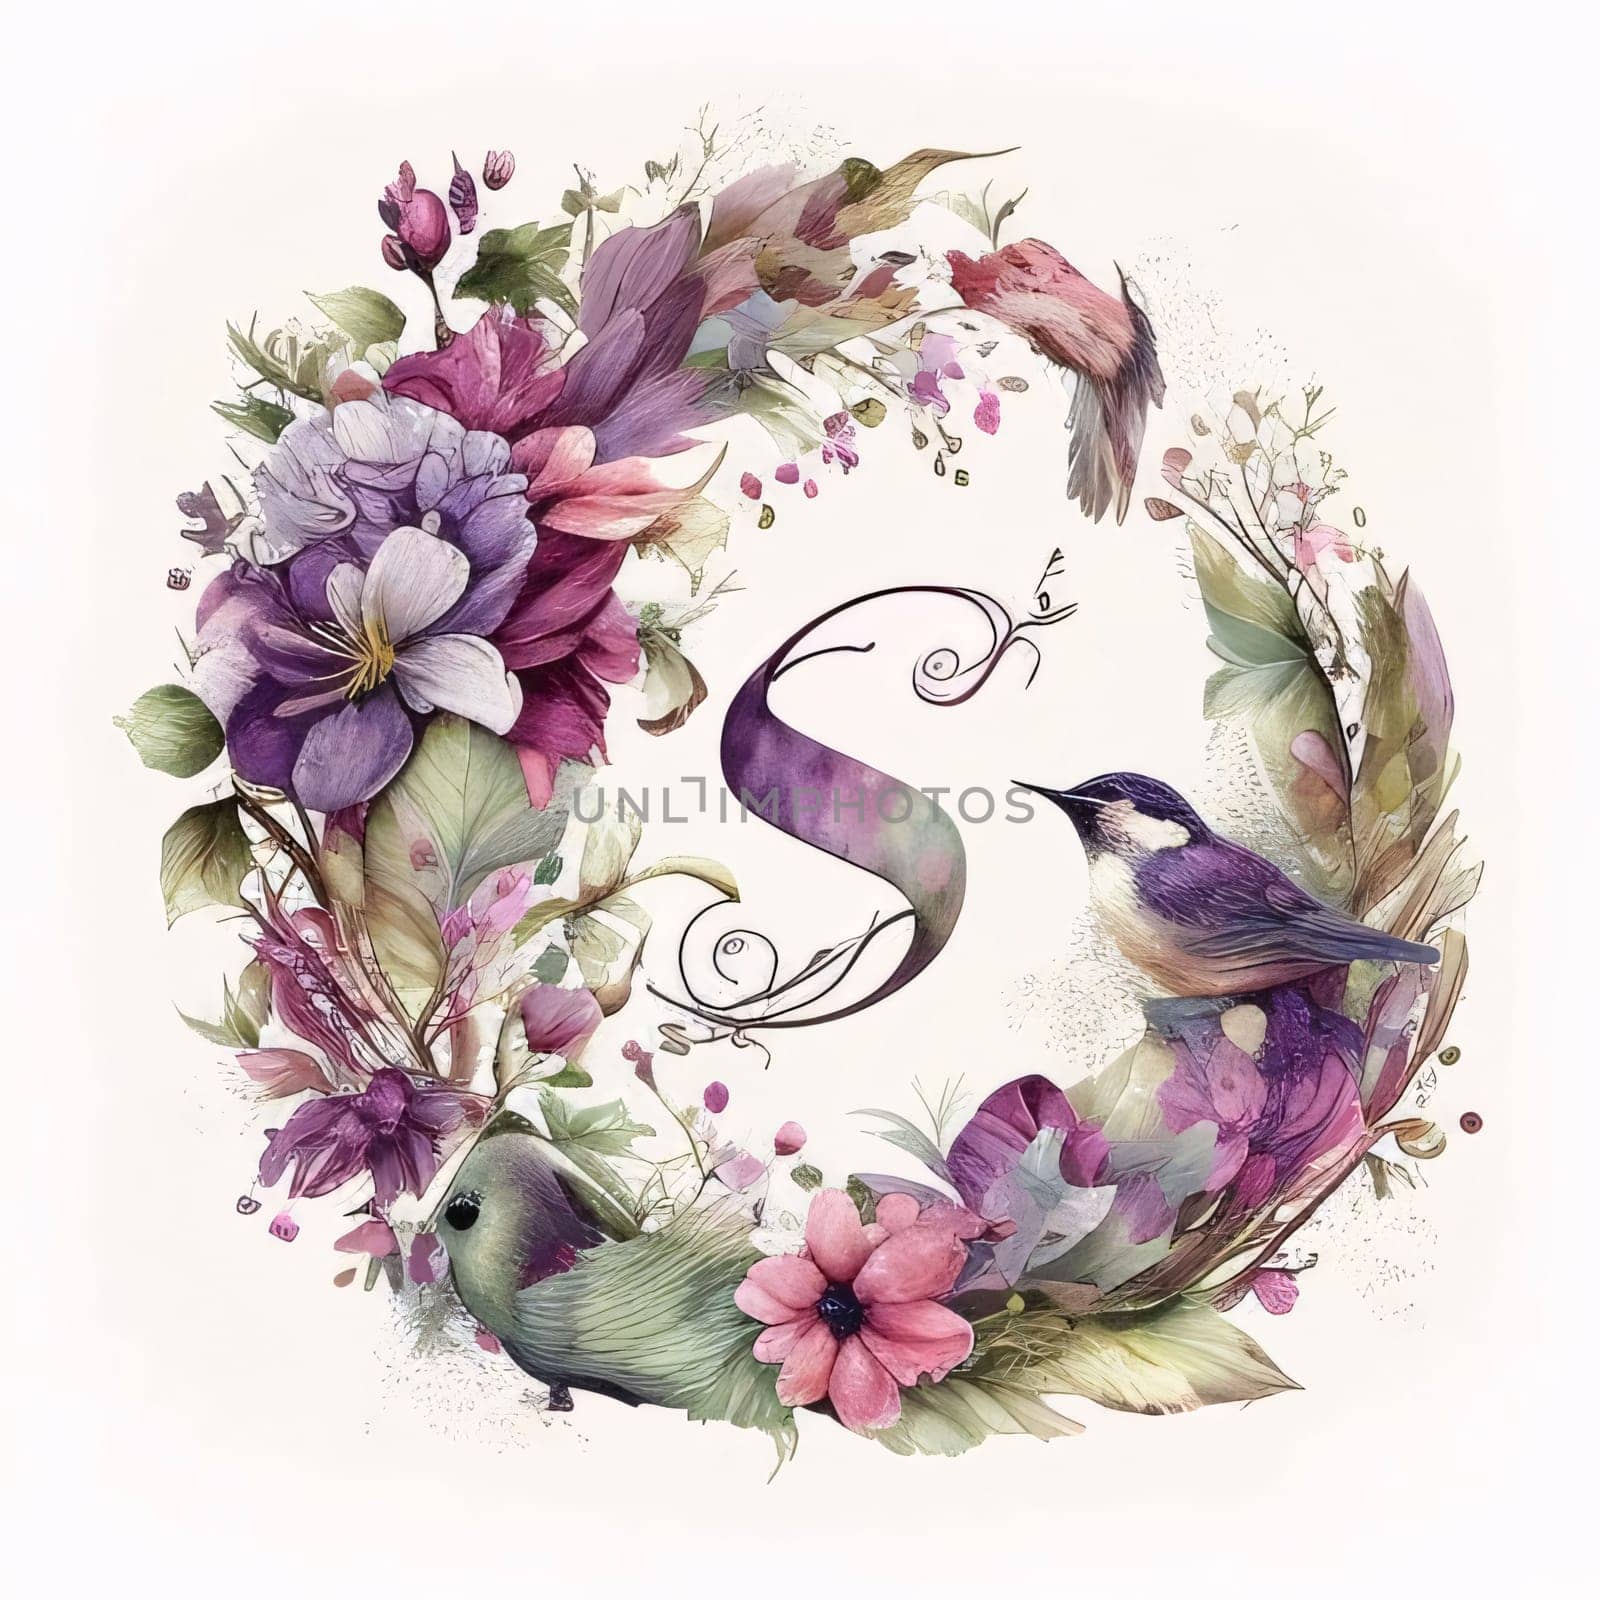 Graphic alphabet letters: Watercolor floral wreath with birds and flowers. Illustration.